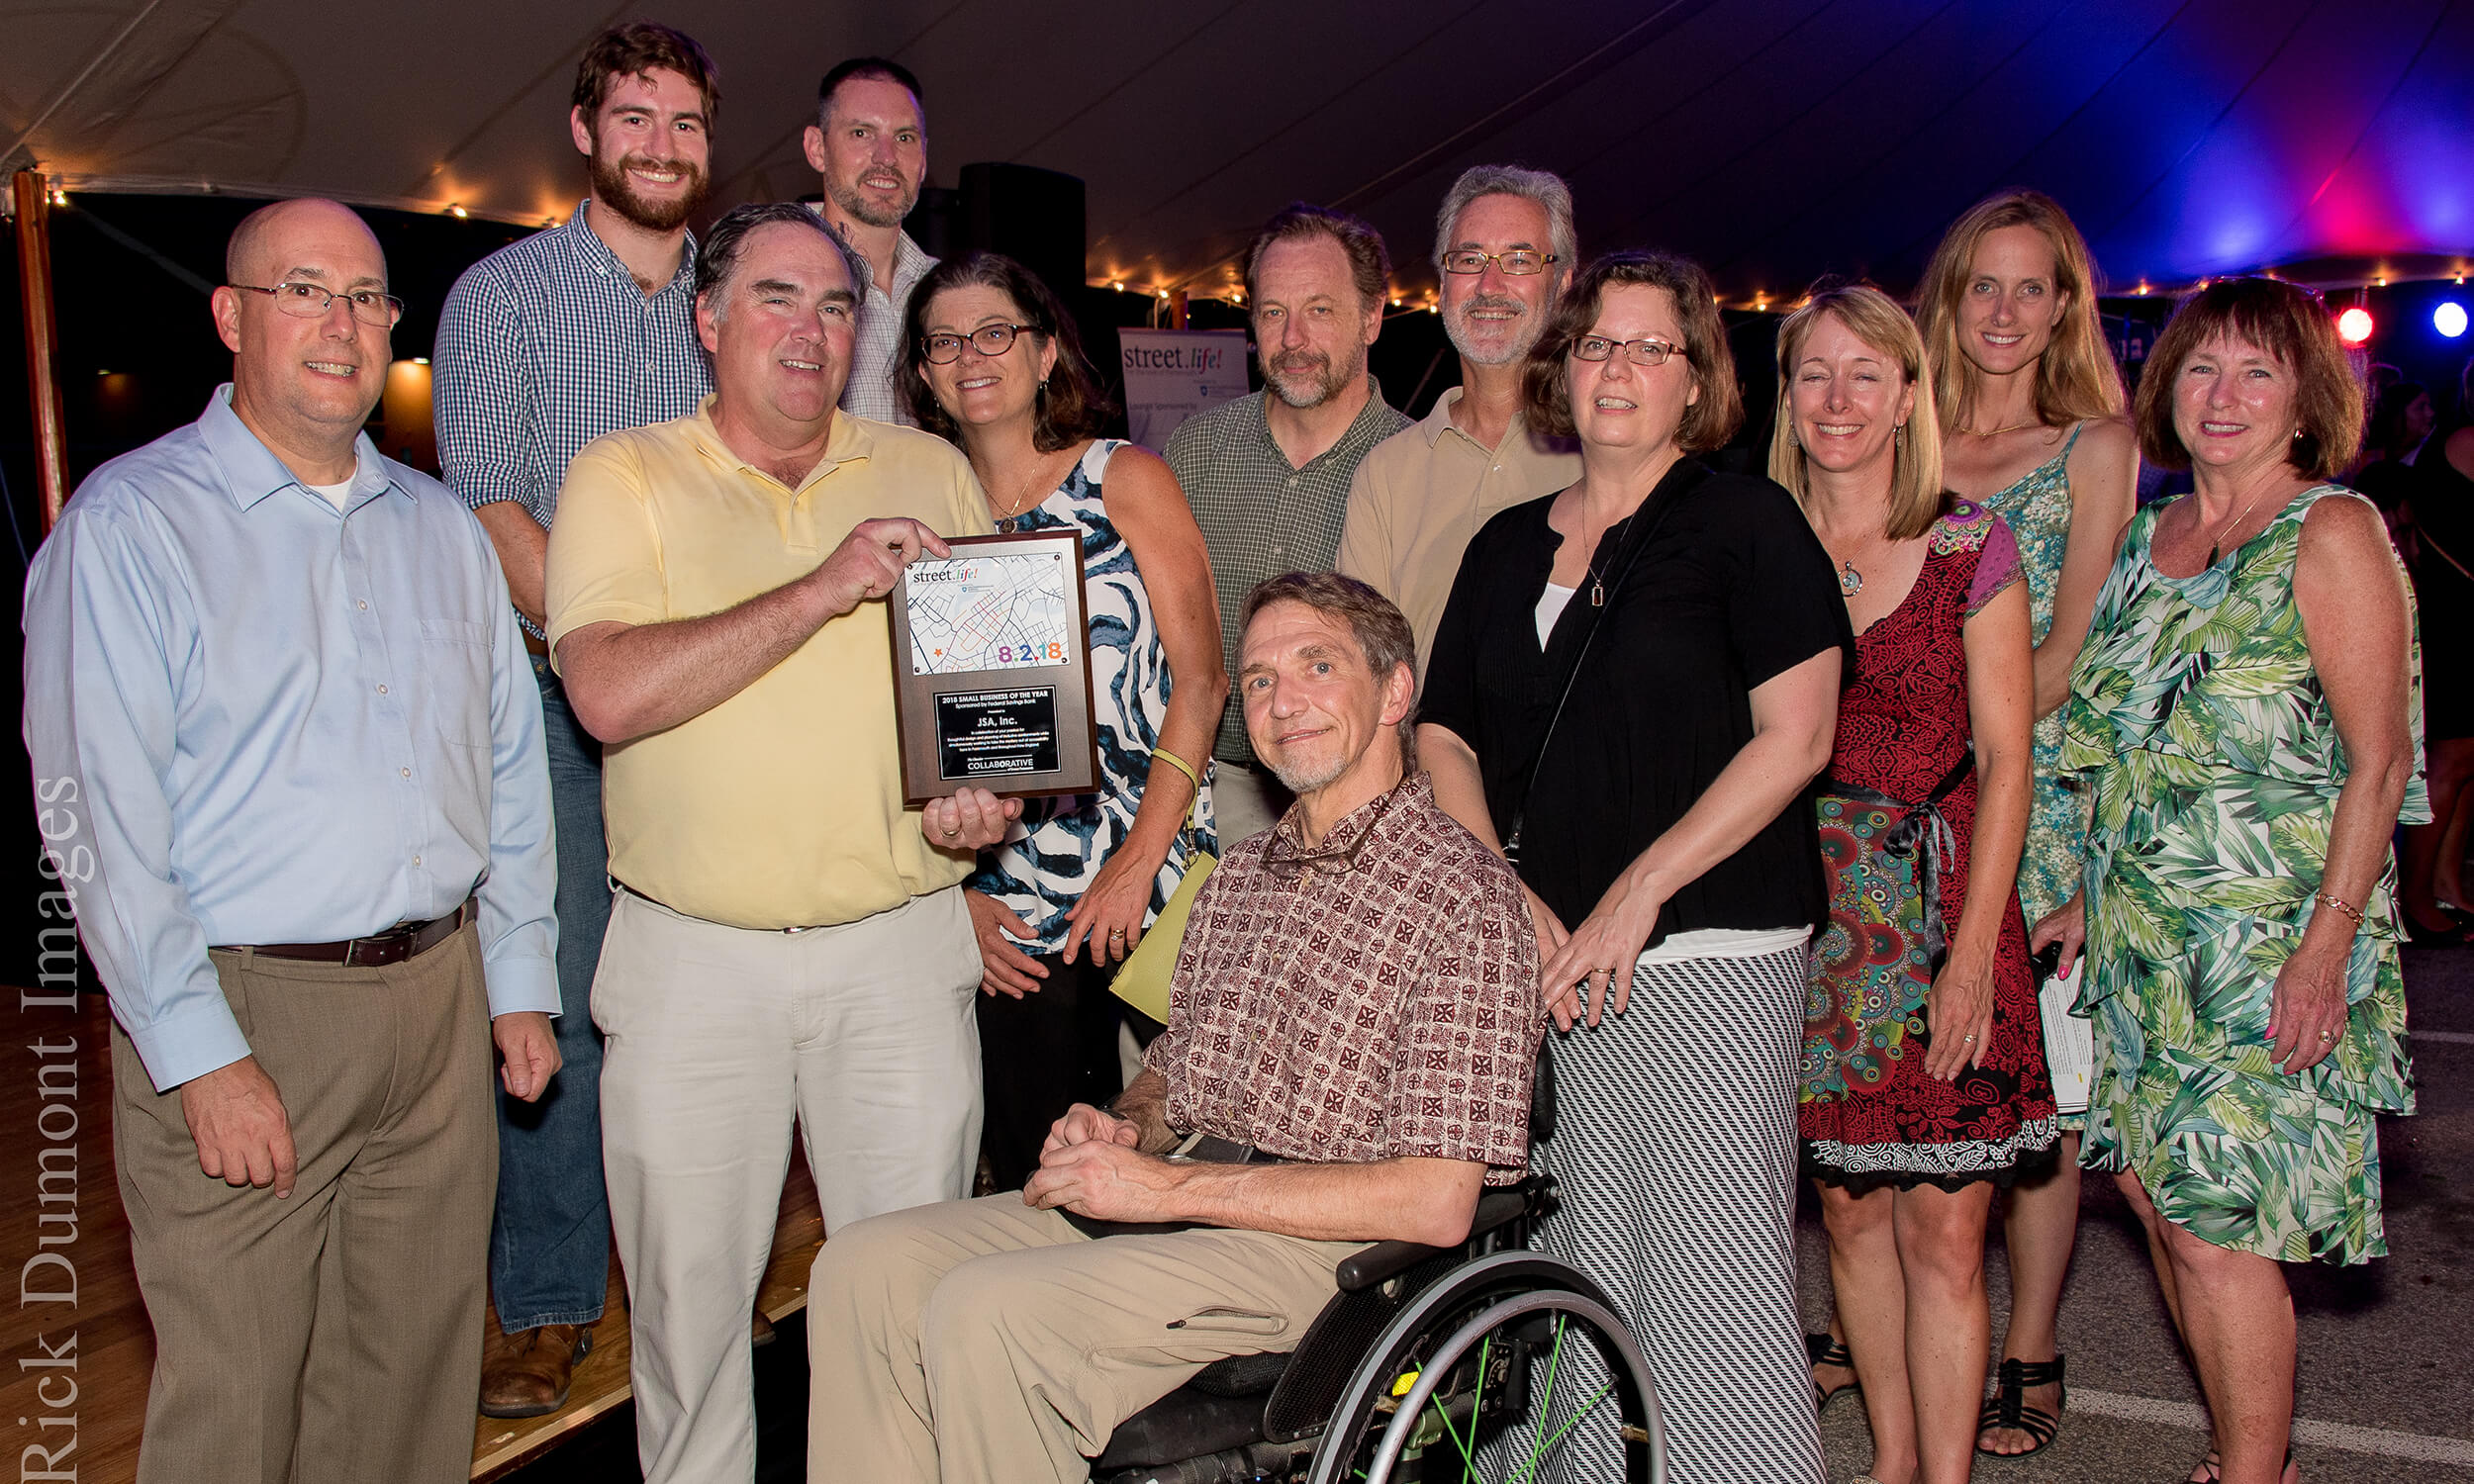 A group of twelve people are gathered around and looking into the camera while smiling, as they've won an award. The group is a mix of men and women, with a man in a wheelchair in the center of the group. The man in a yellow shirt to the left of him is holding an awards plaque.